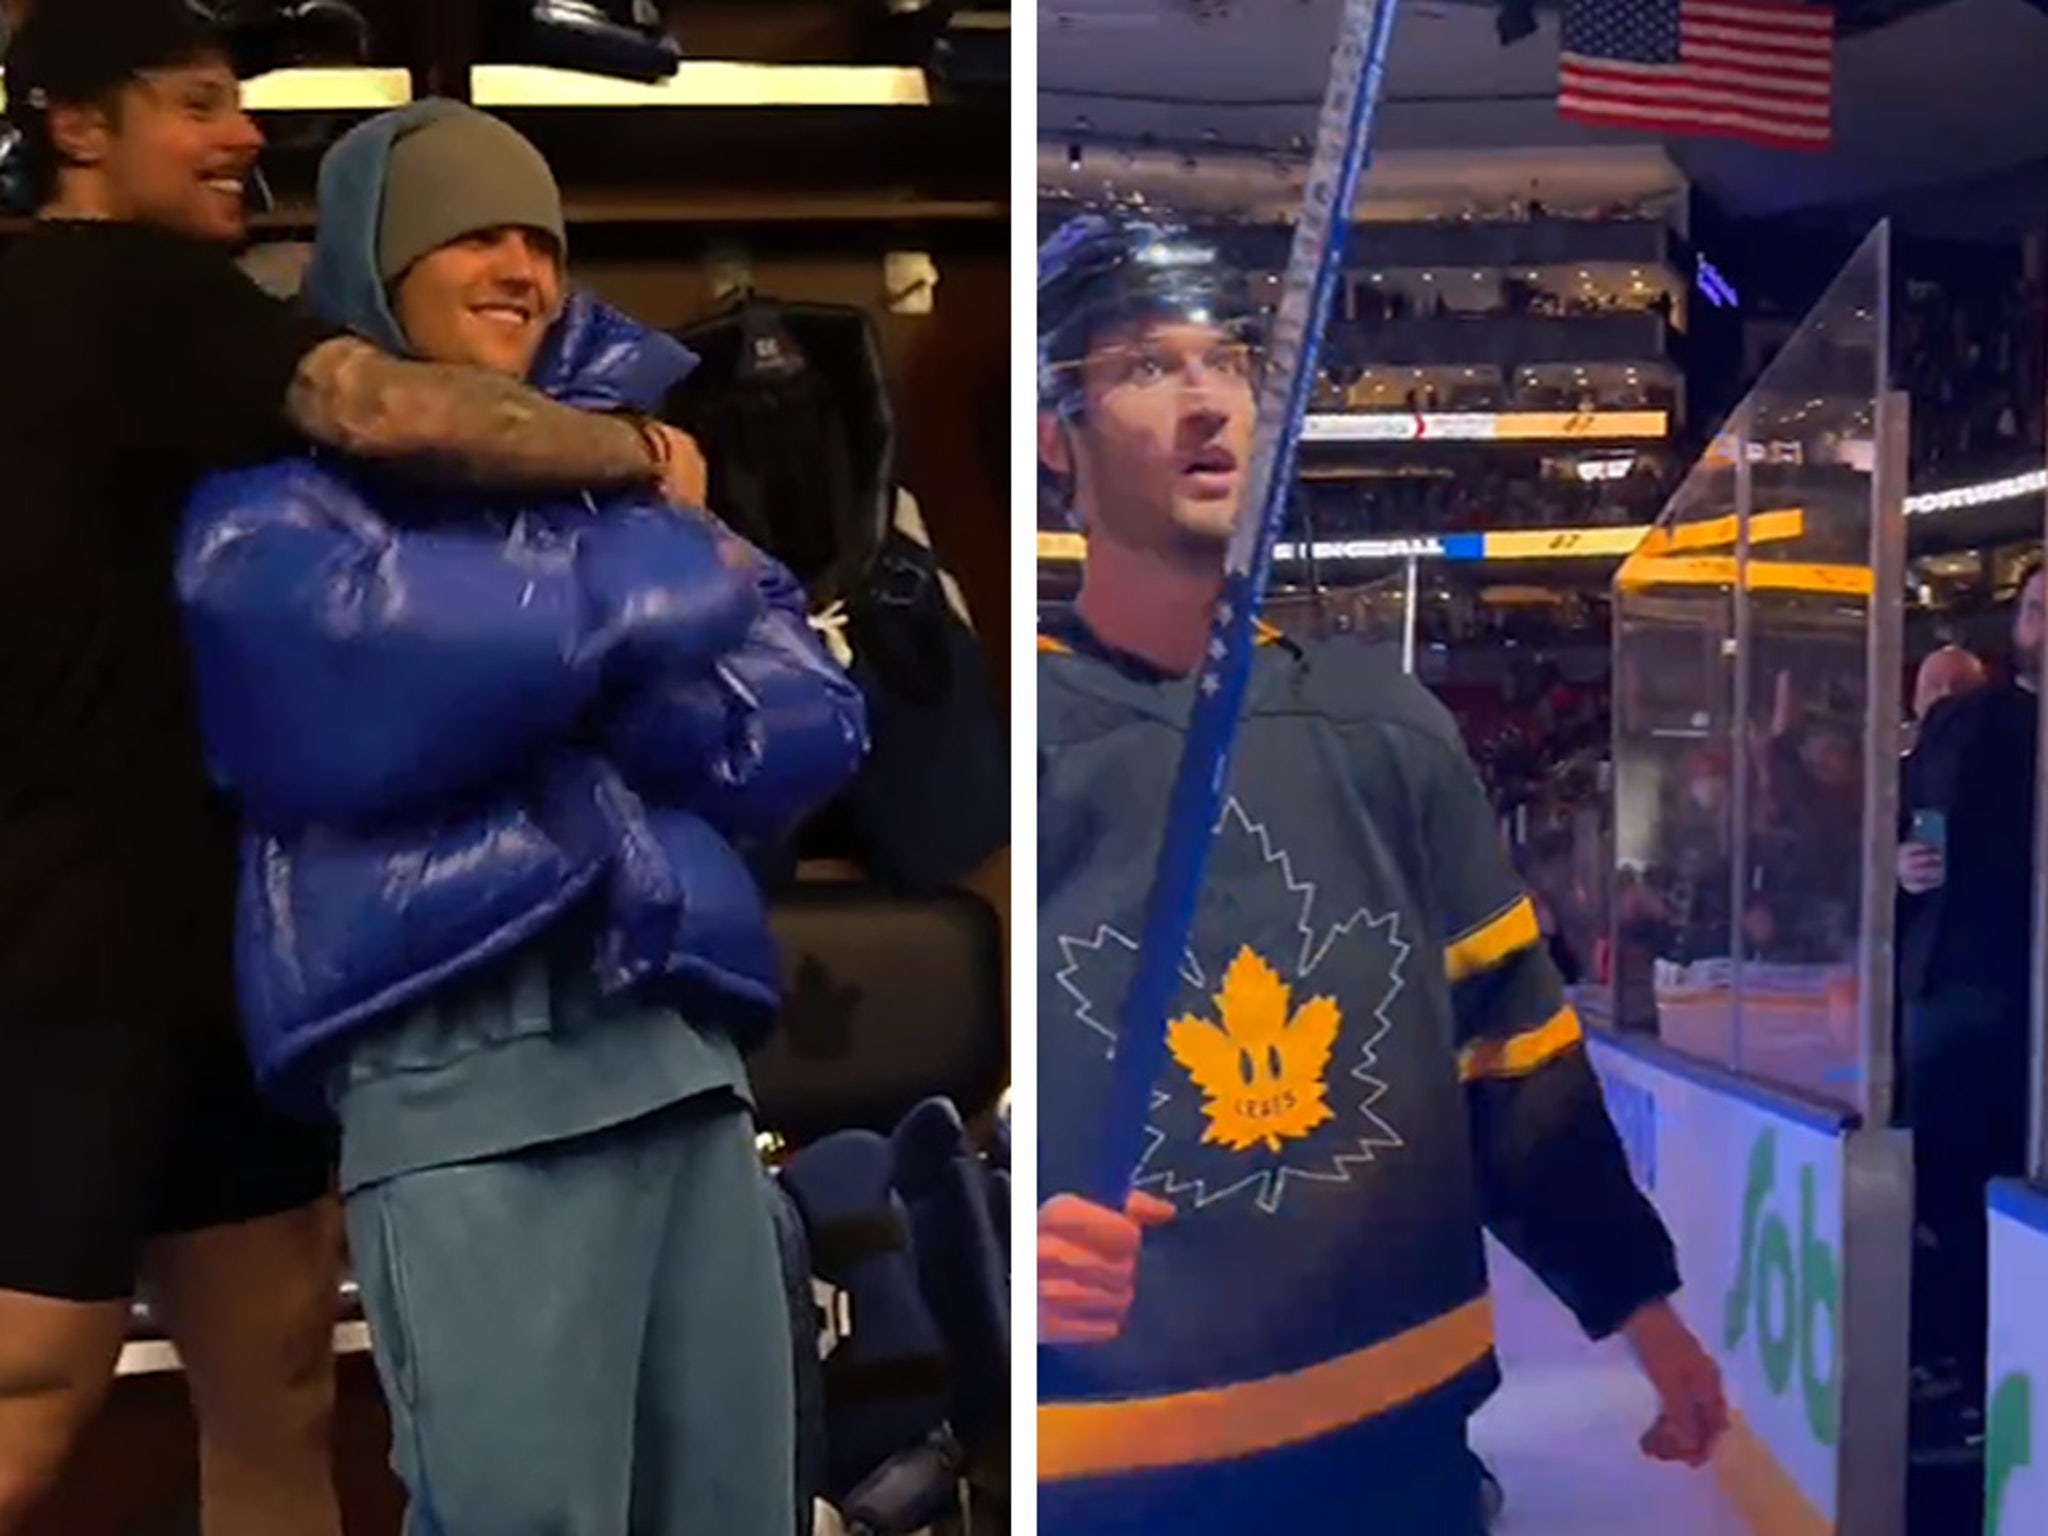 A look at the blossoming bromance of Auston Matthews and Justin Bieber